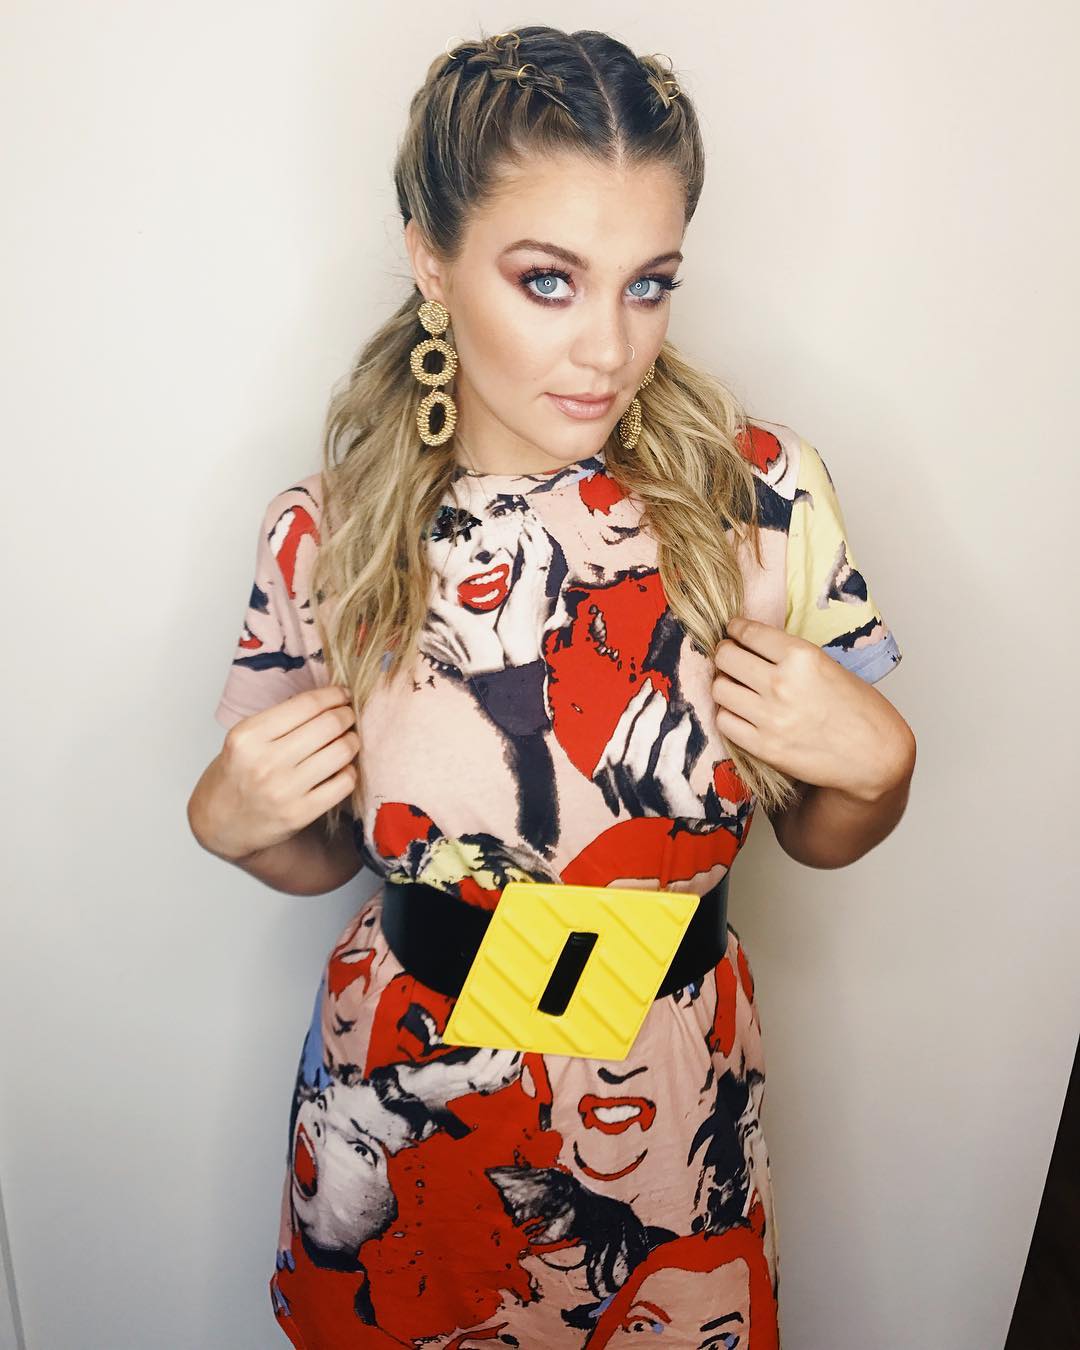 55+ Hot Pictures Of Lauren Alaina Are Seriously Epitome Of Beauty | Best Of Comic Books